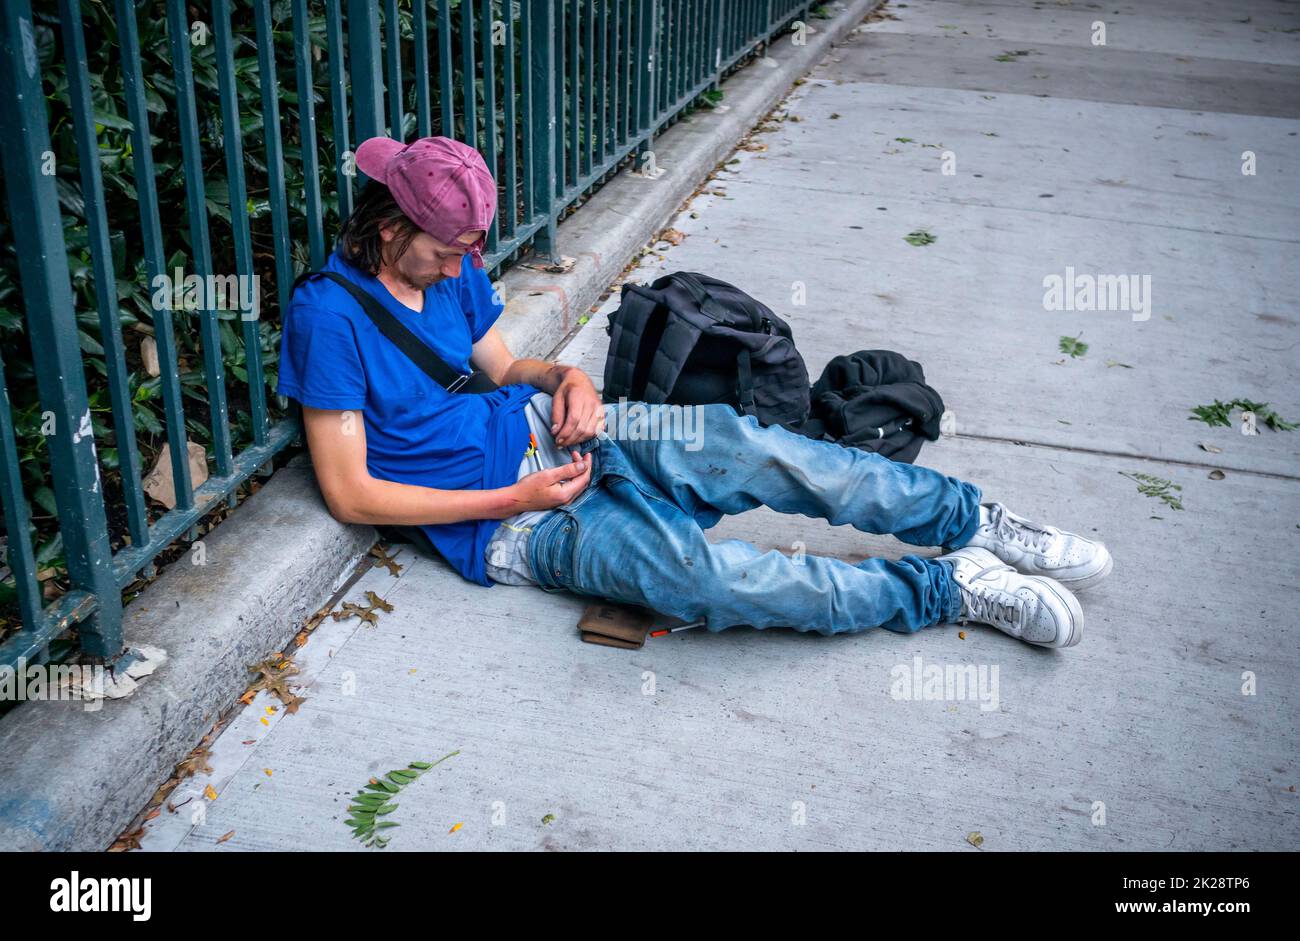 A junkie drug user nods out in Chelsea in New York on Wednesday, September 7, 2022. (© Richard B. Levine) Stock Photo